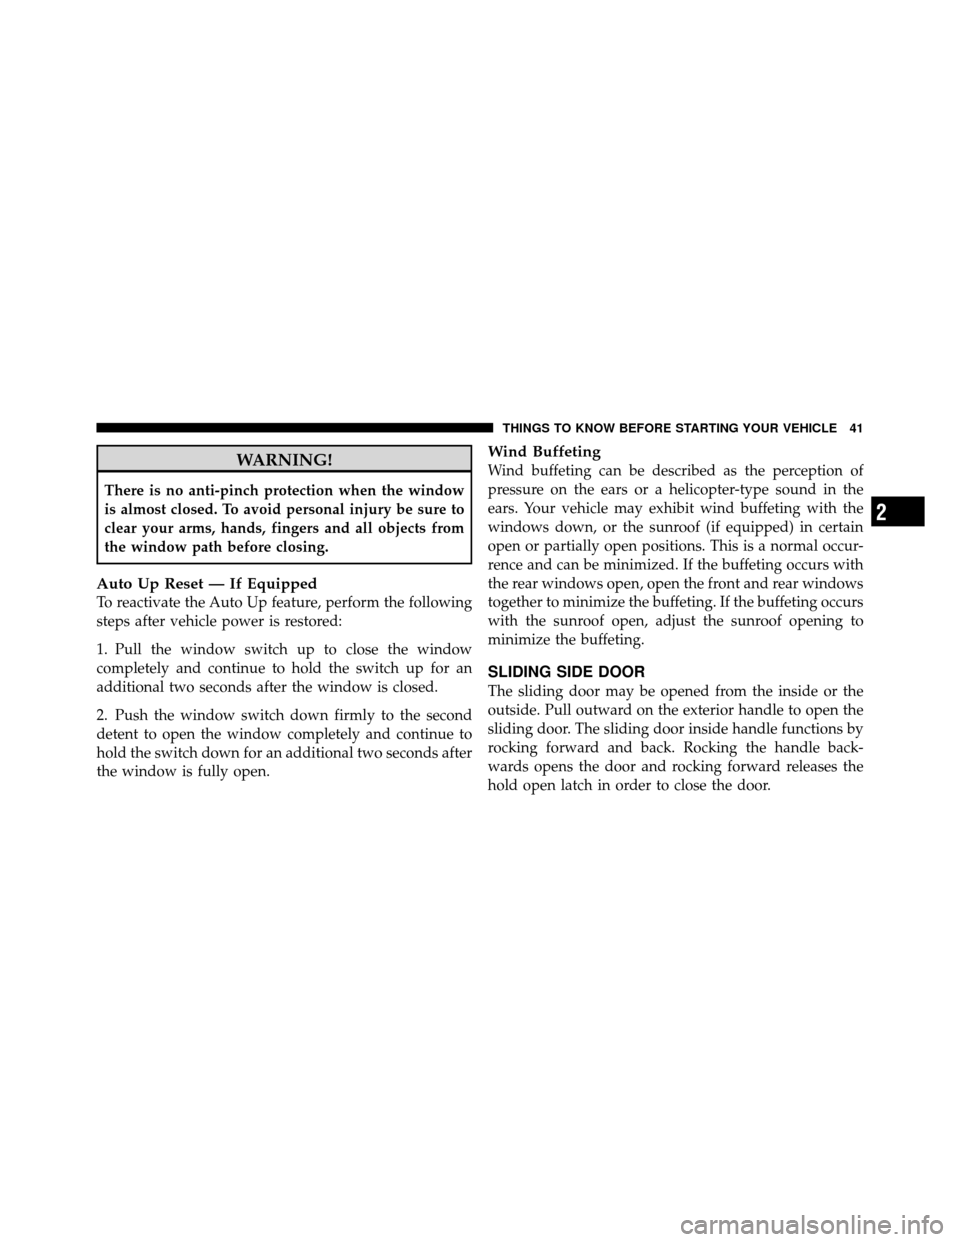 CHRYSLER TOWN AND COUNTRY 2010 5.G Service Manual WARNING!
There is no anti-pinch protection when the window
is almost closed. To avoid personal injury be sure to
clear your arms, hands, fingers and all objects from
the window path before closing.
Au